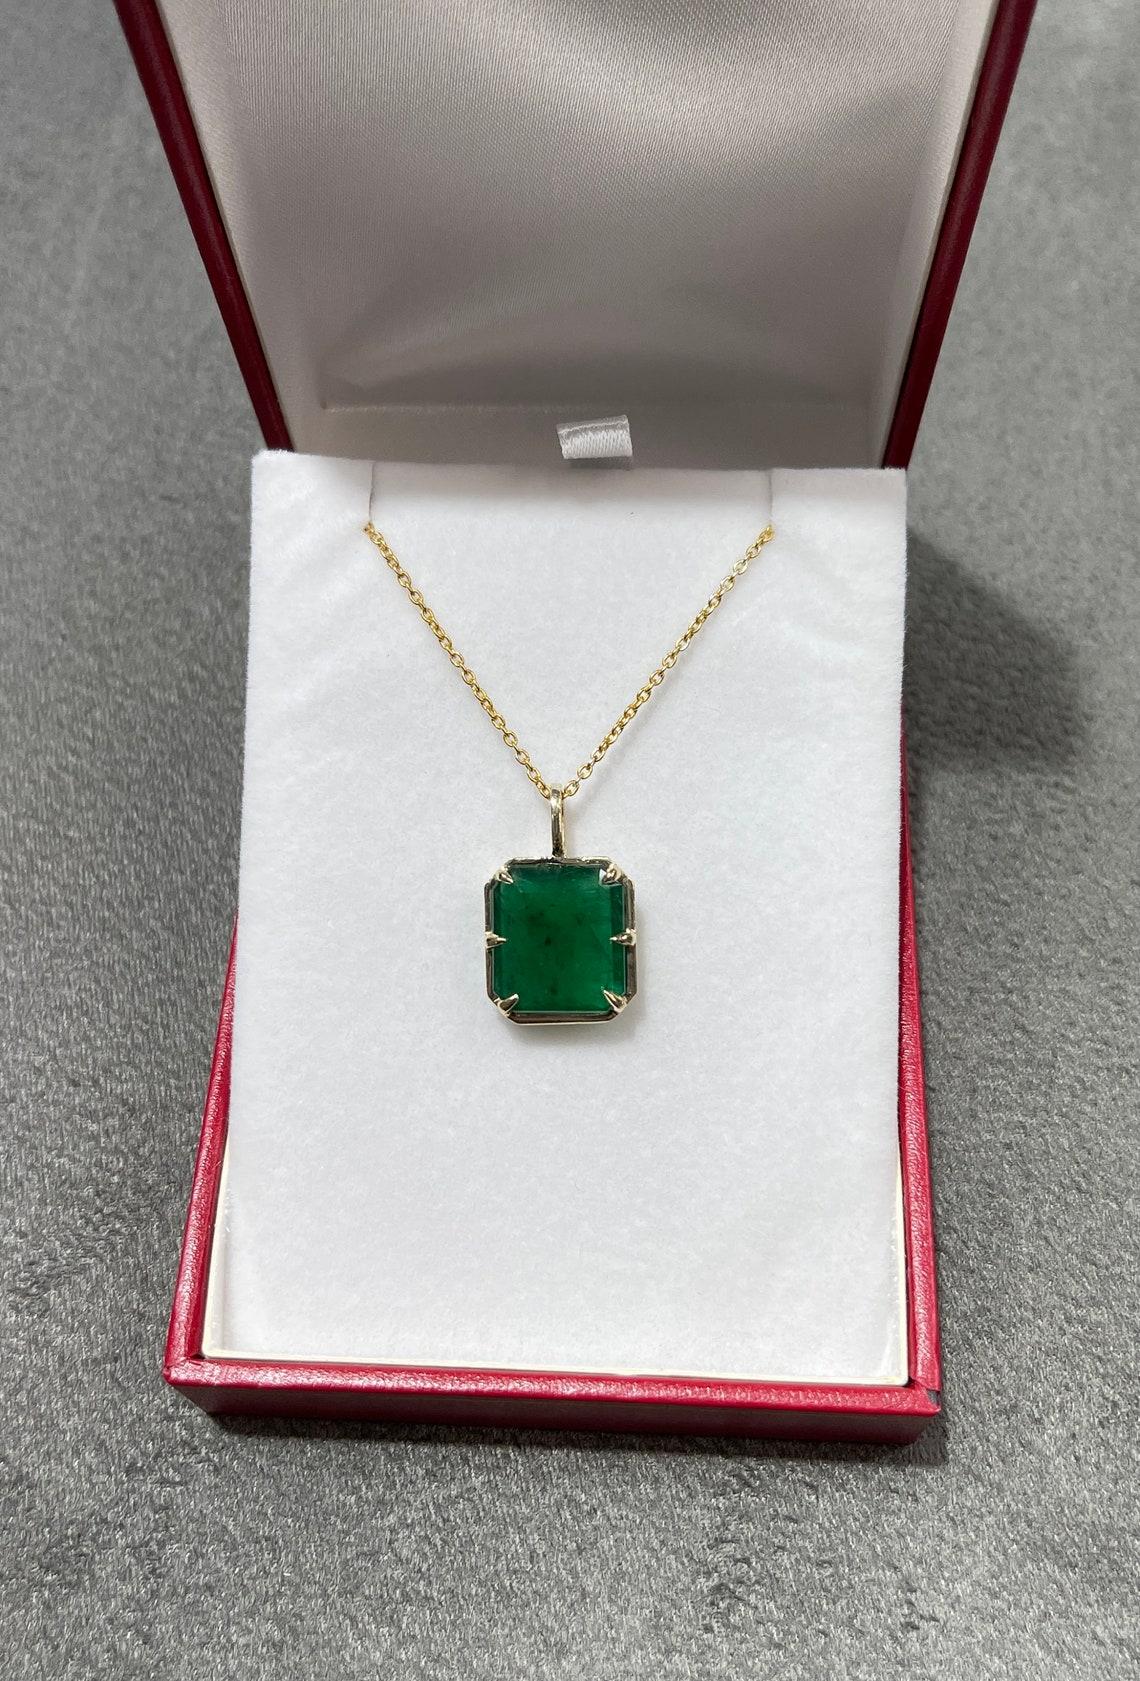 Displayed is a natural emerald Georgian styled solitaire pendant in 14K yellow gold. This gorgeous solitaire pendant carries an earth-mined emerald in a prong setting. Fully faceted, this gemstone showcases excellent shine. The emerald has good